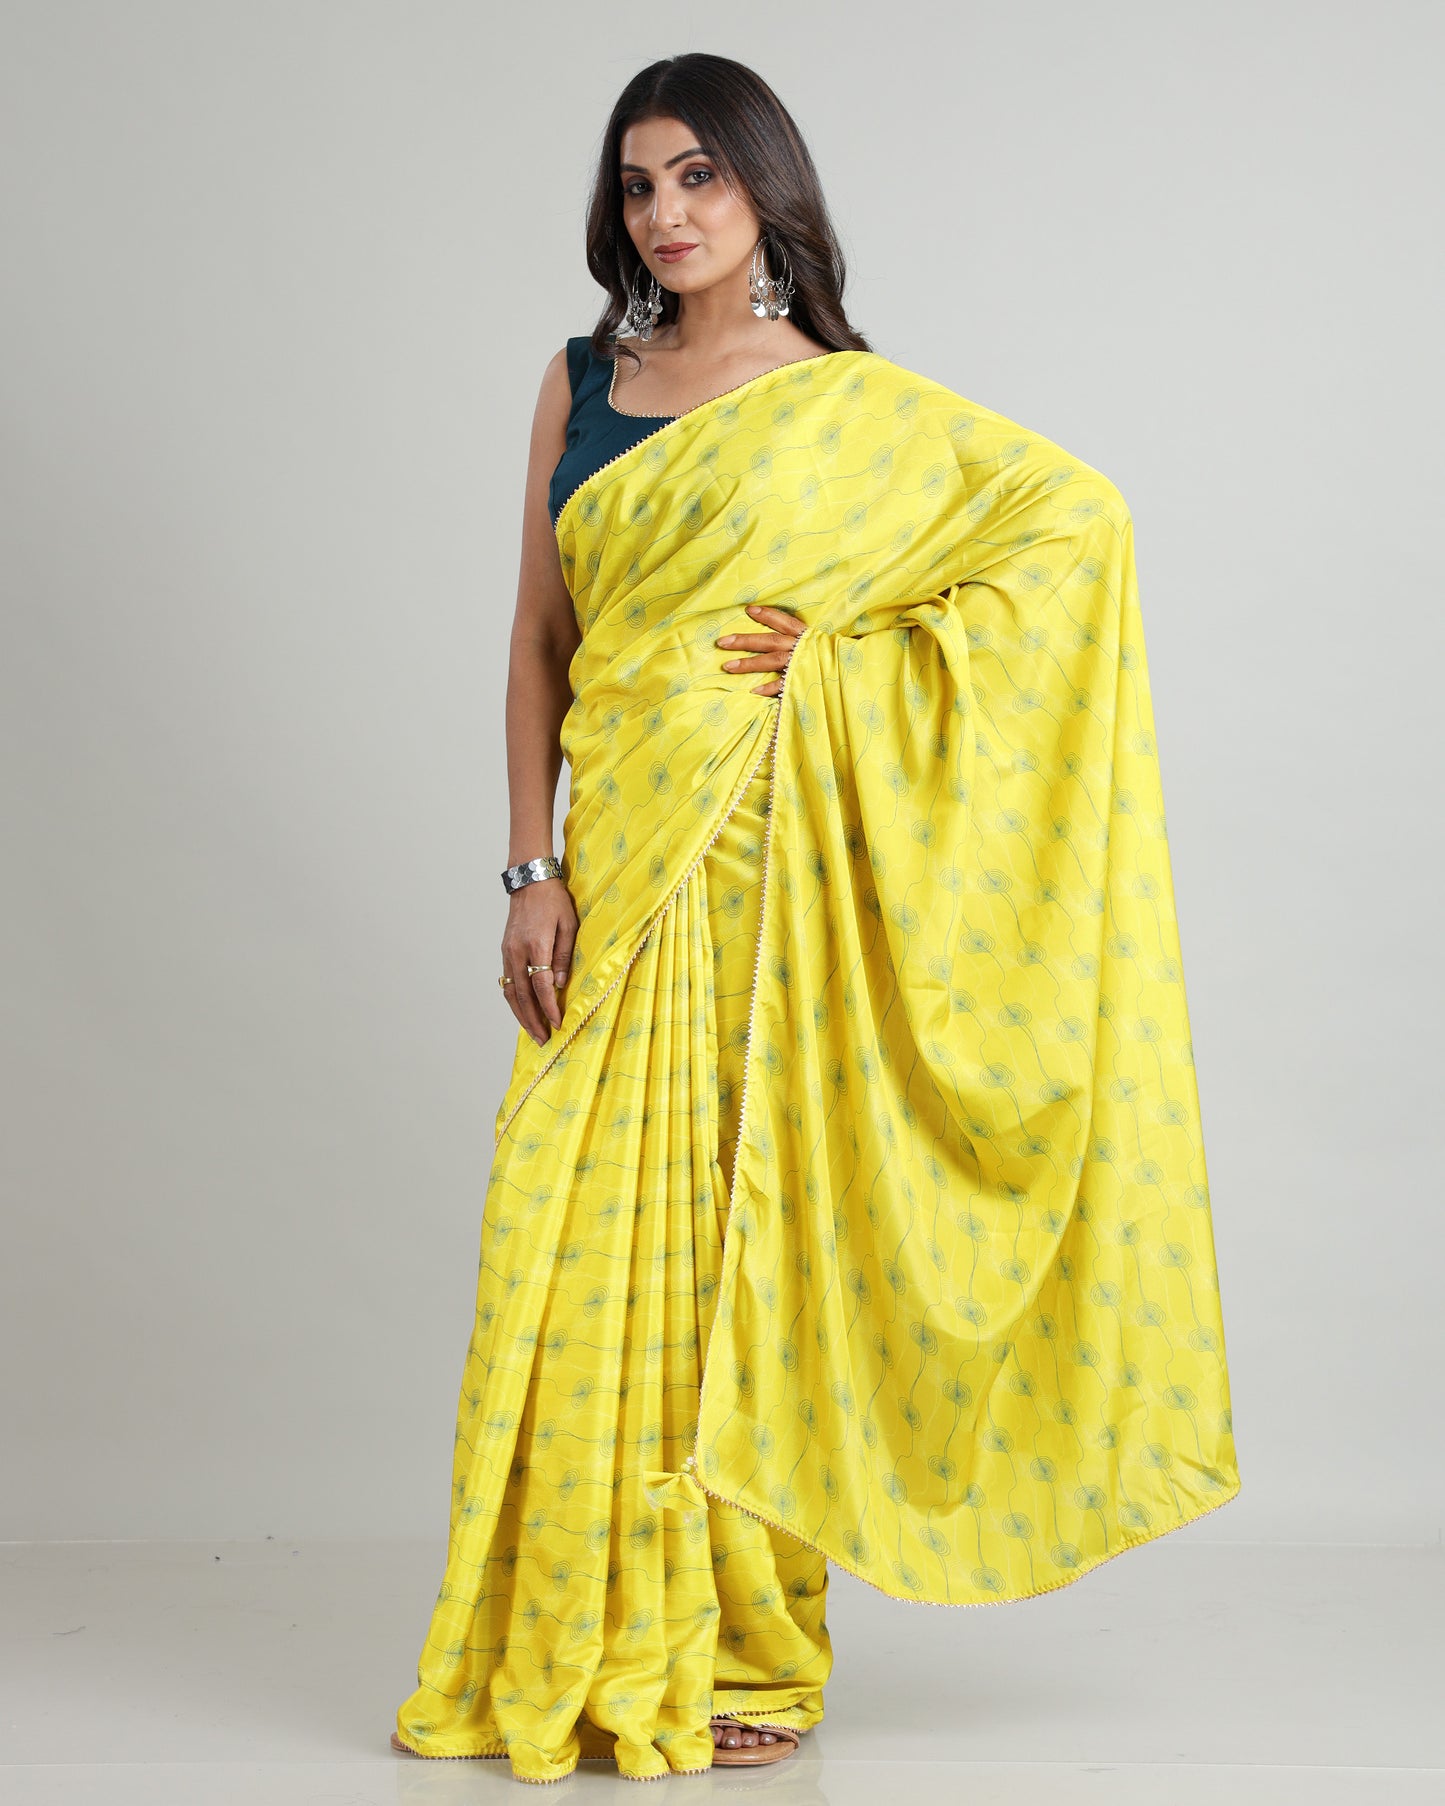 Cool Breeze, Silk Embrace: The Crafted Comfort Saree